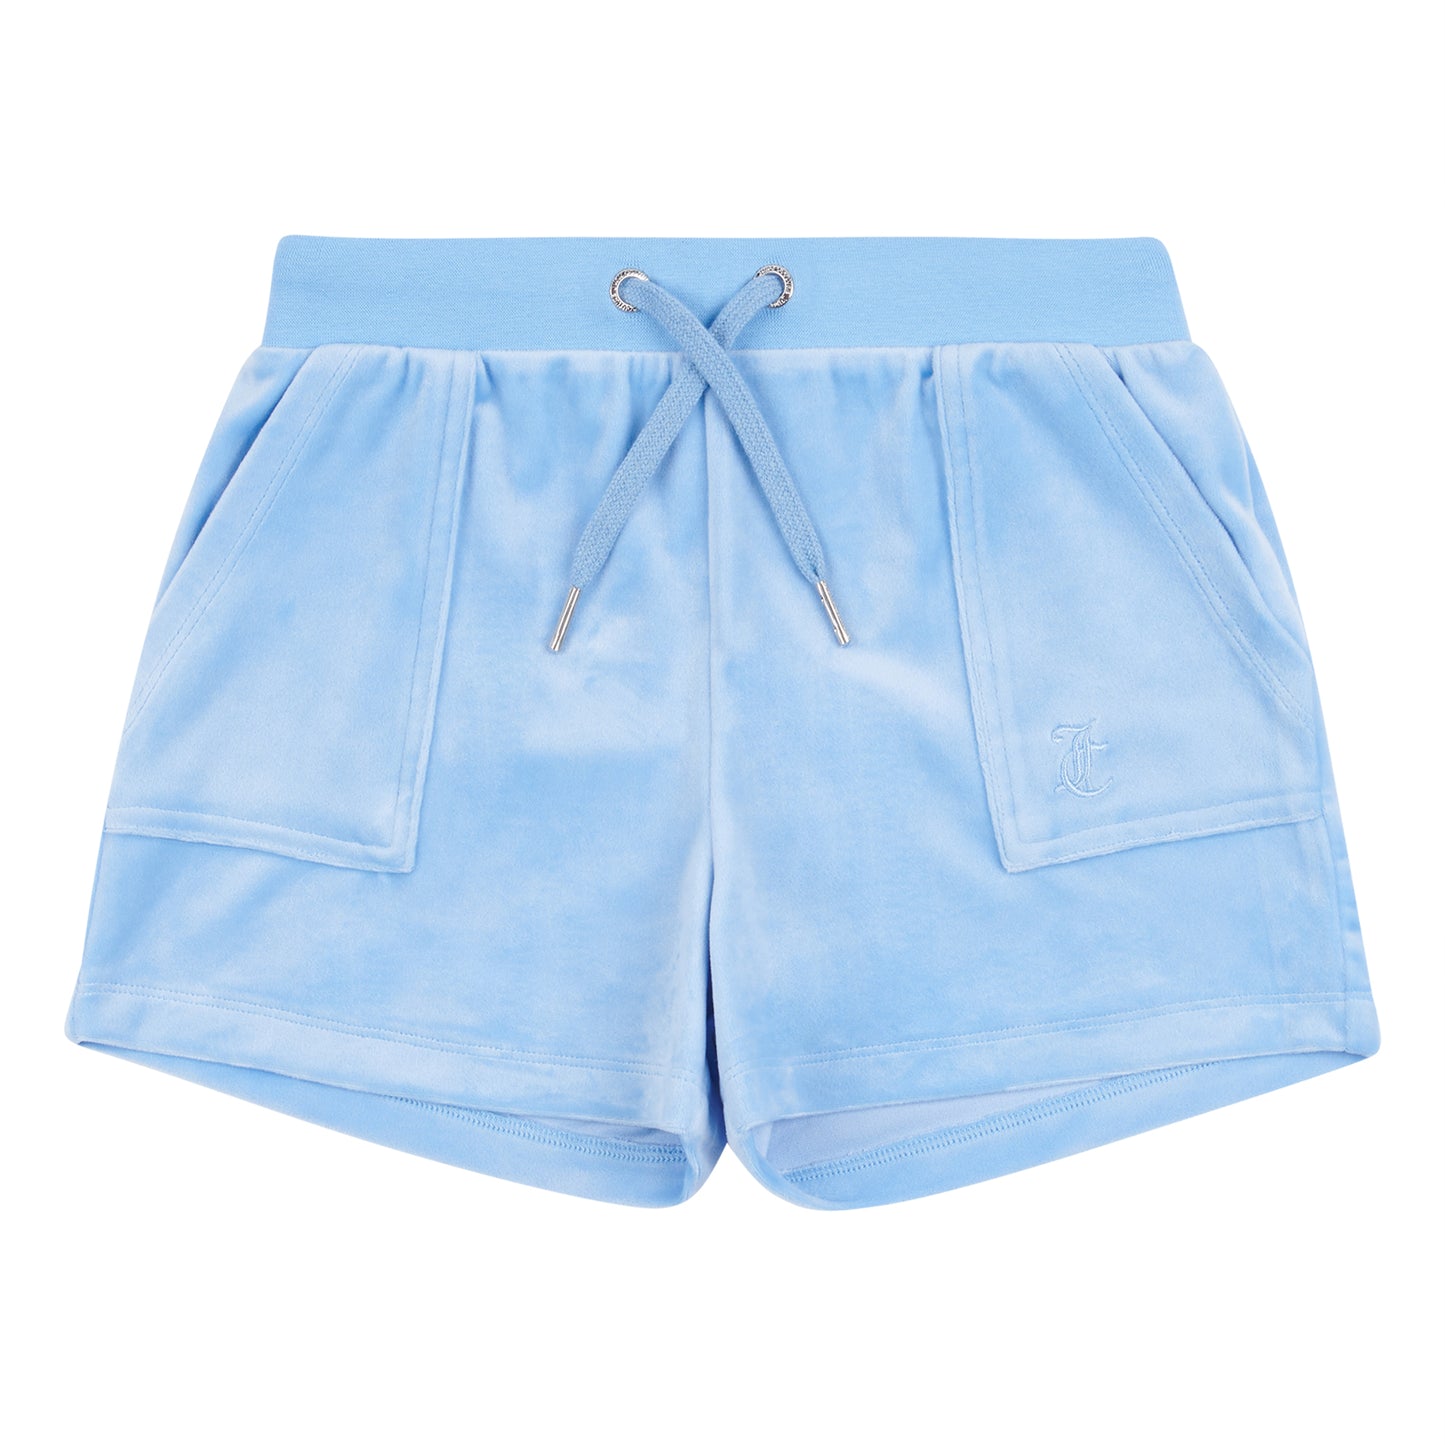 Juicy Couture Girls Della Robbia Blue T shirt and Velore Shorts Set